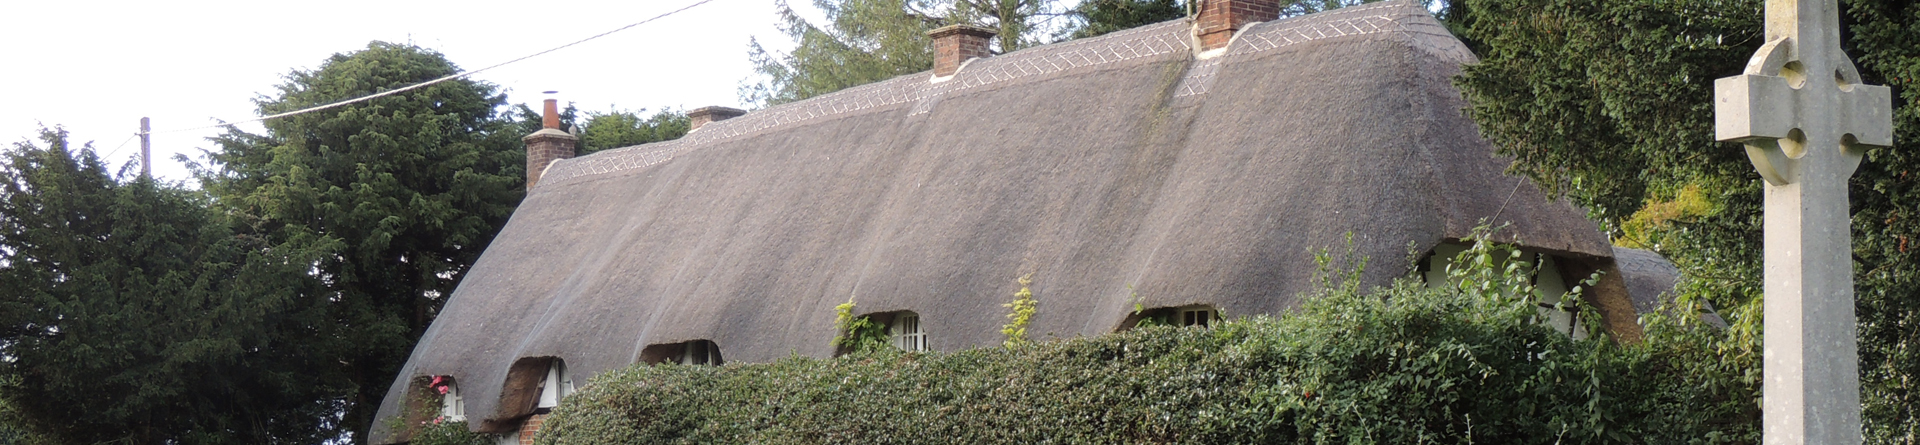 An image of a thatched roof